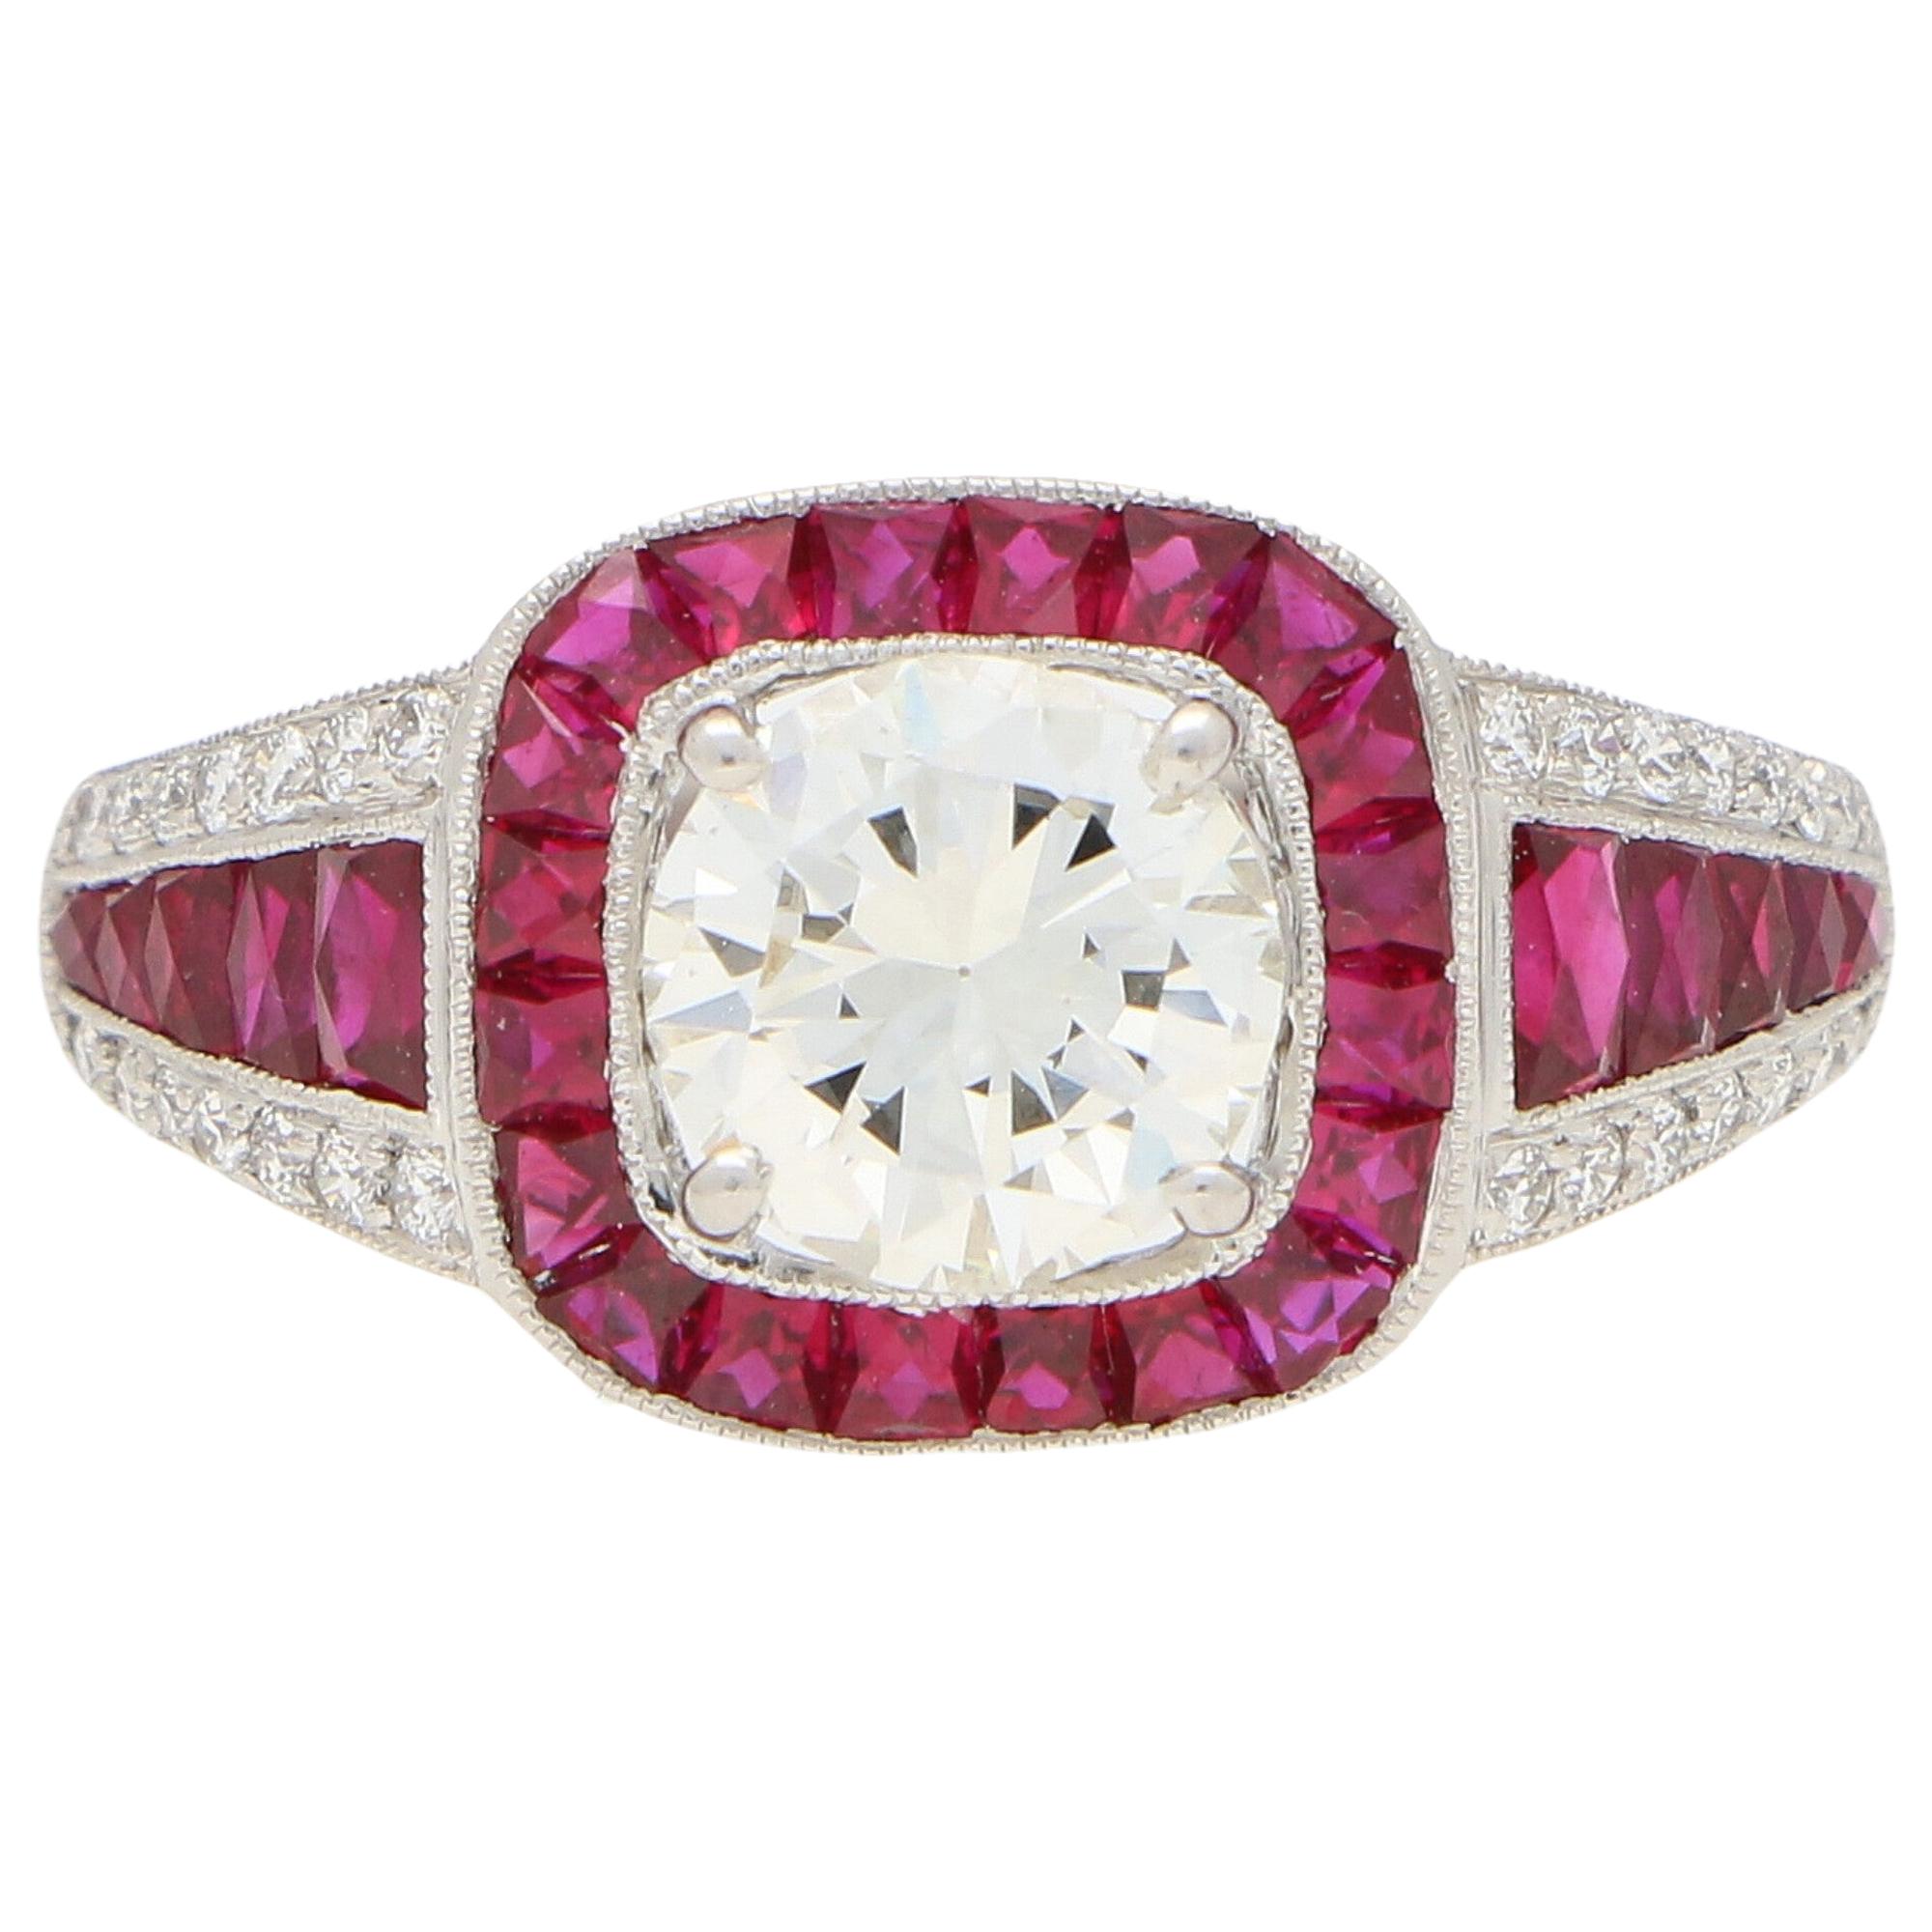 Art Deco Inspired Ruby and Diamond Target Engagement Dress Ring Set in Platinum